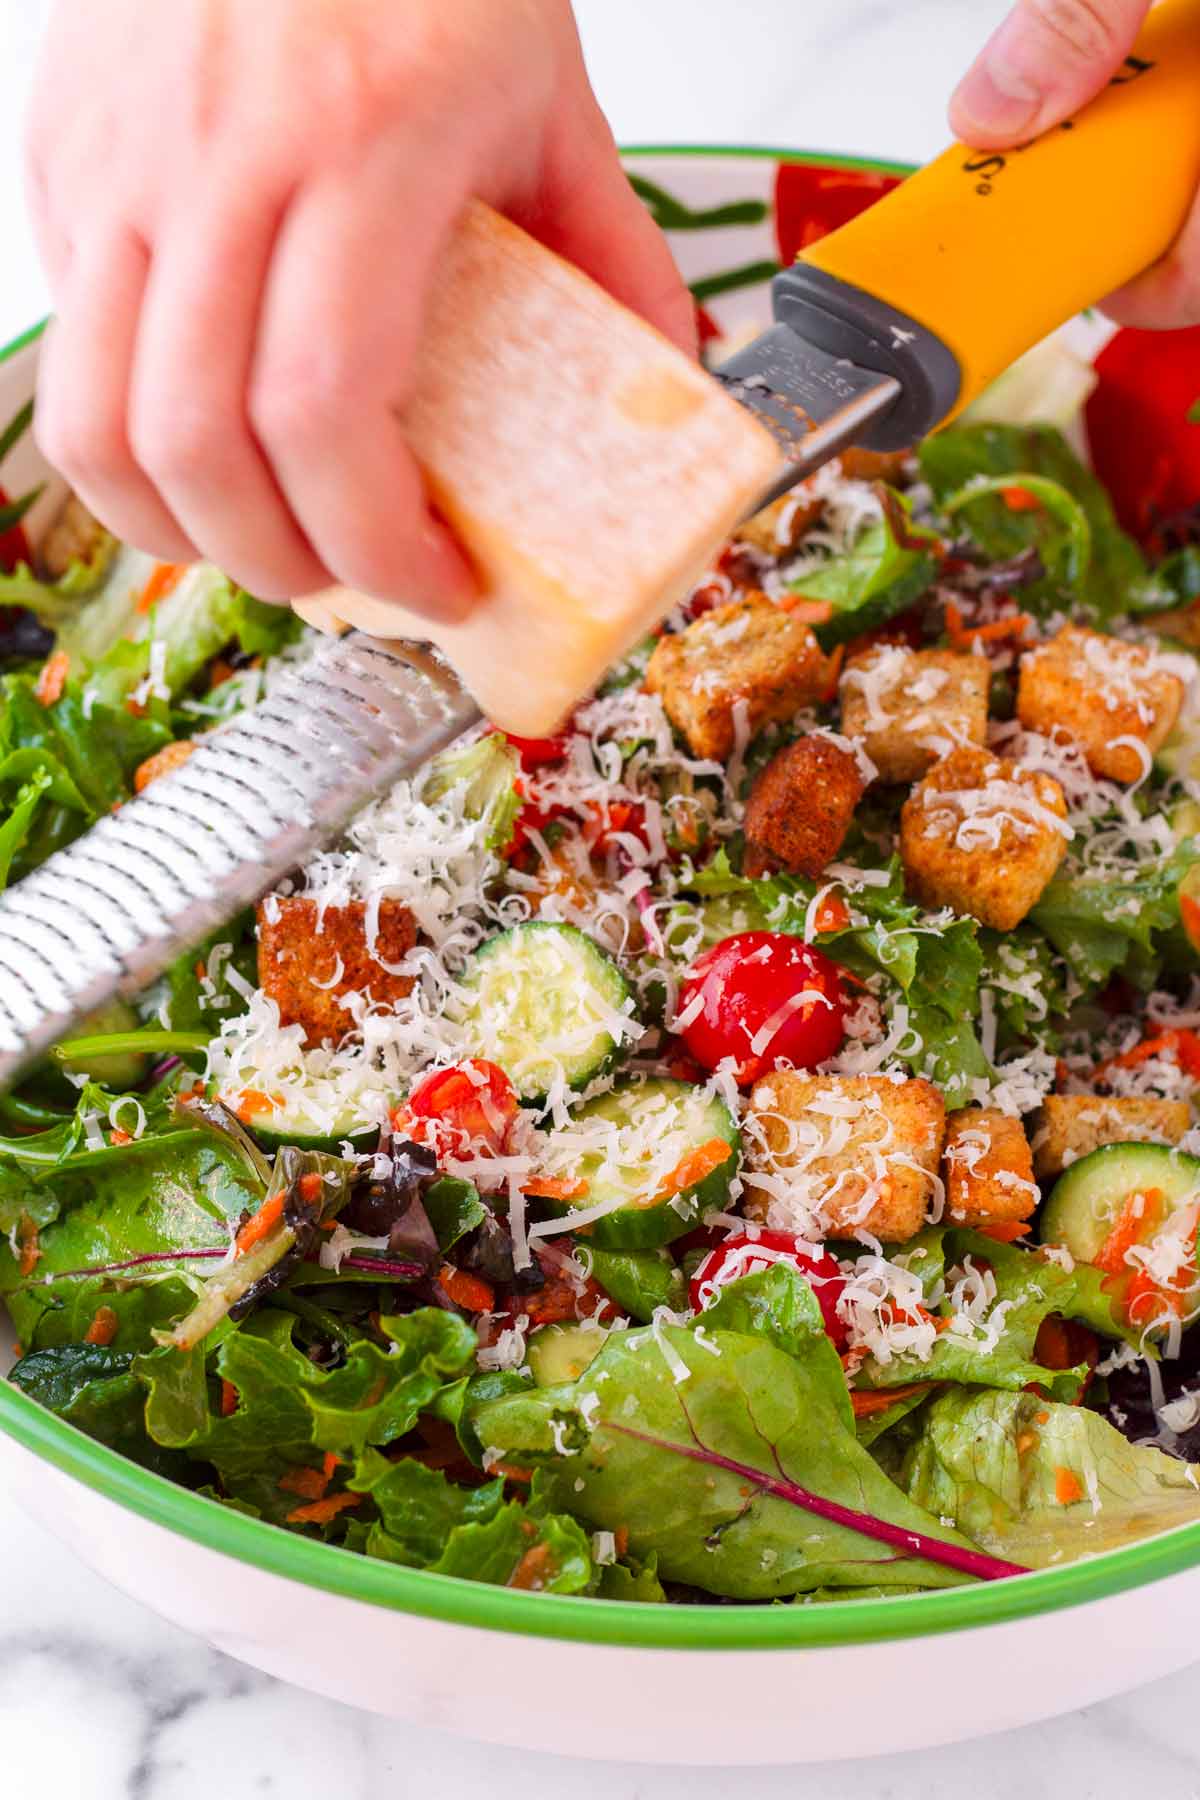 grating cheese on top of prepared salad